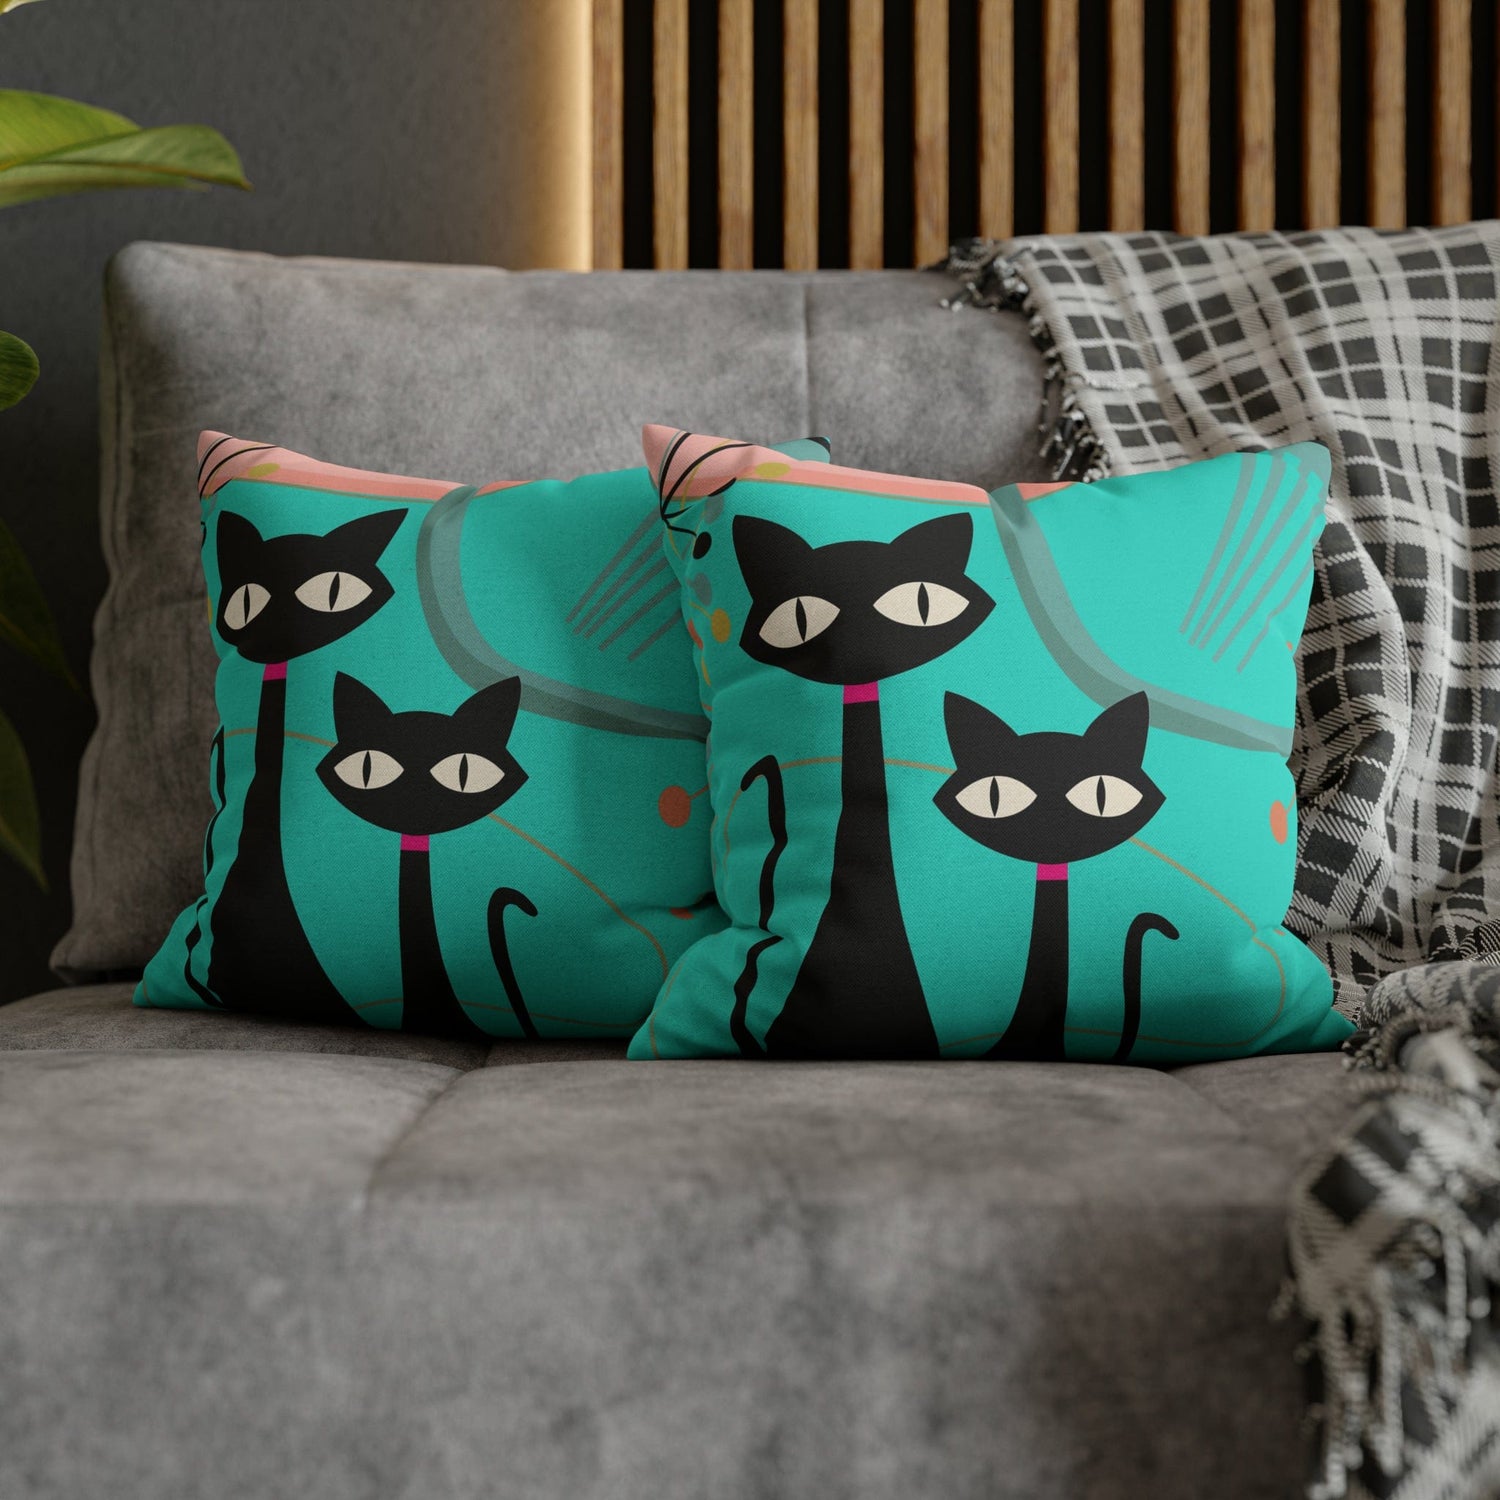 Kate McEnroe New York Retro Atomic Cat Throw Pillow Cover in Mid Century Modern Turquoise and Pink Throw Pillow Covers